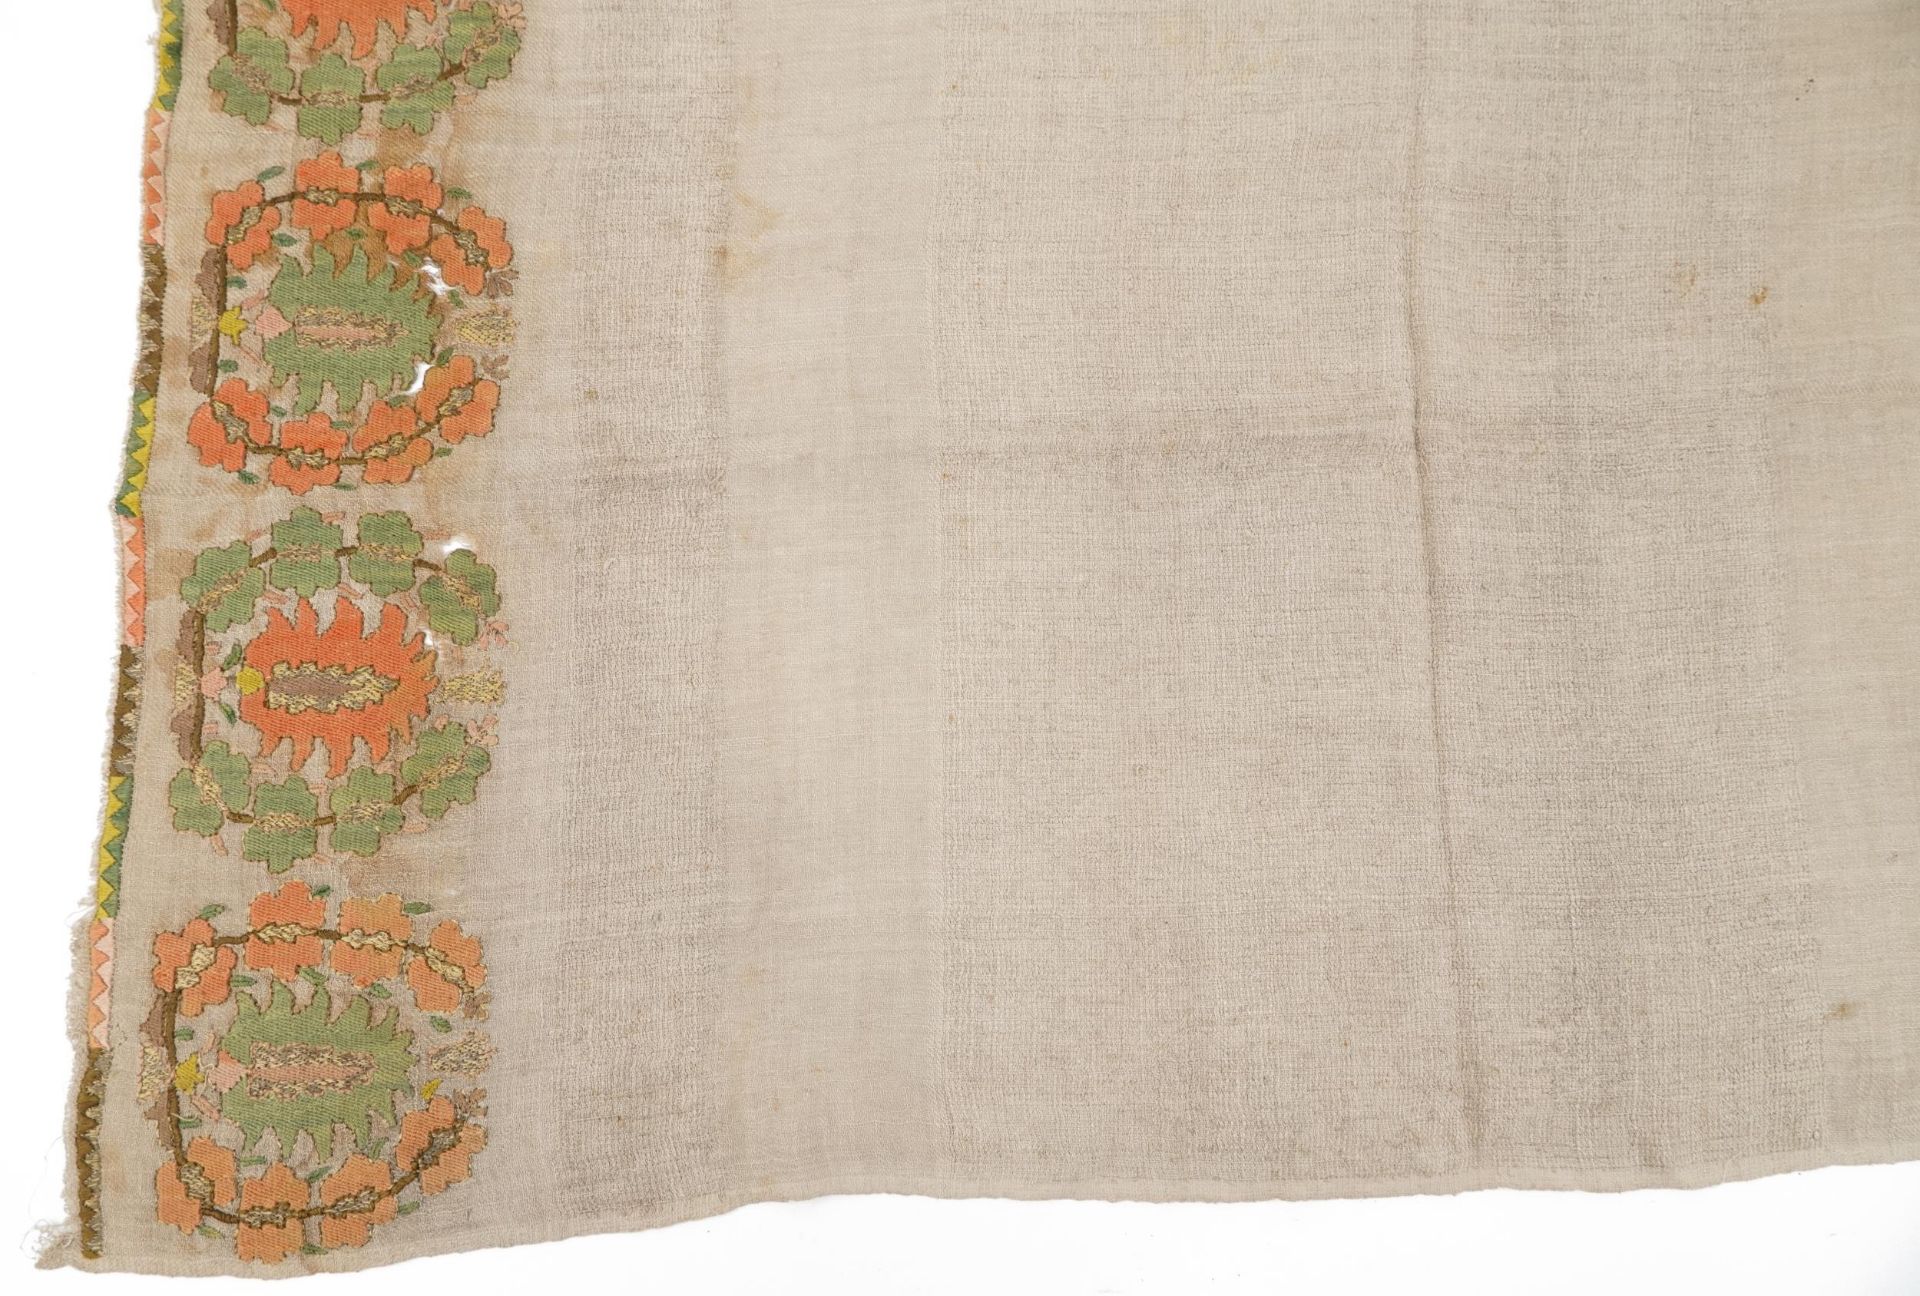 Turkish Ottoman Yaghk cotton and silk textile embroidered with flowers, 130cm x 66cm - Image 7 of 12